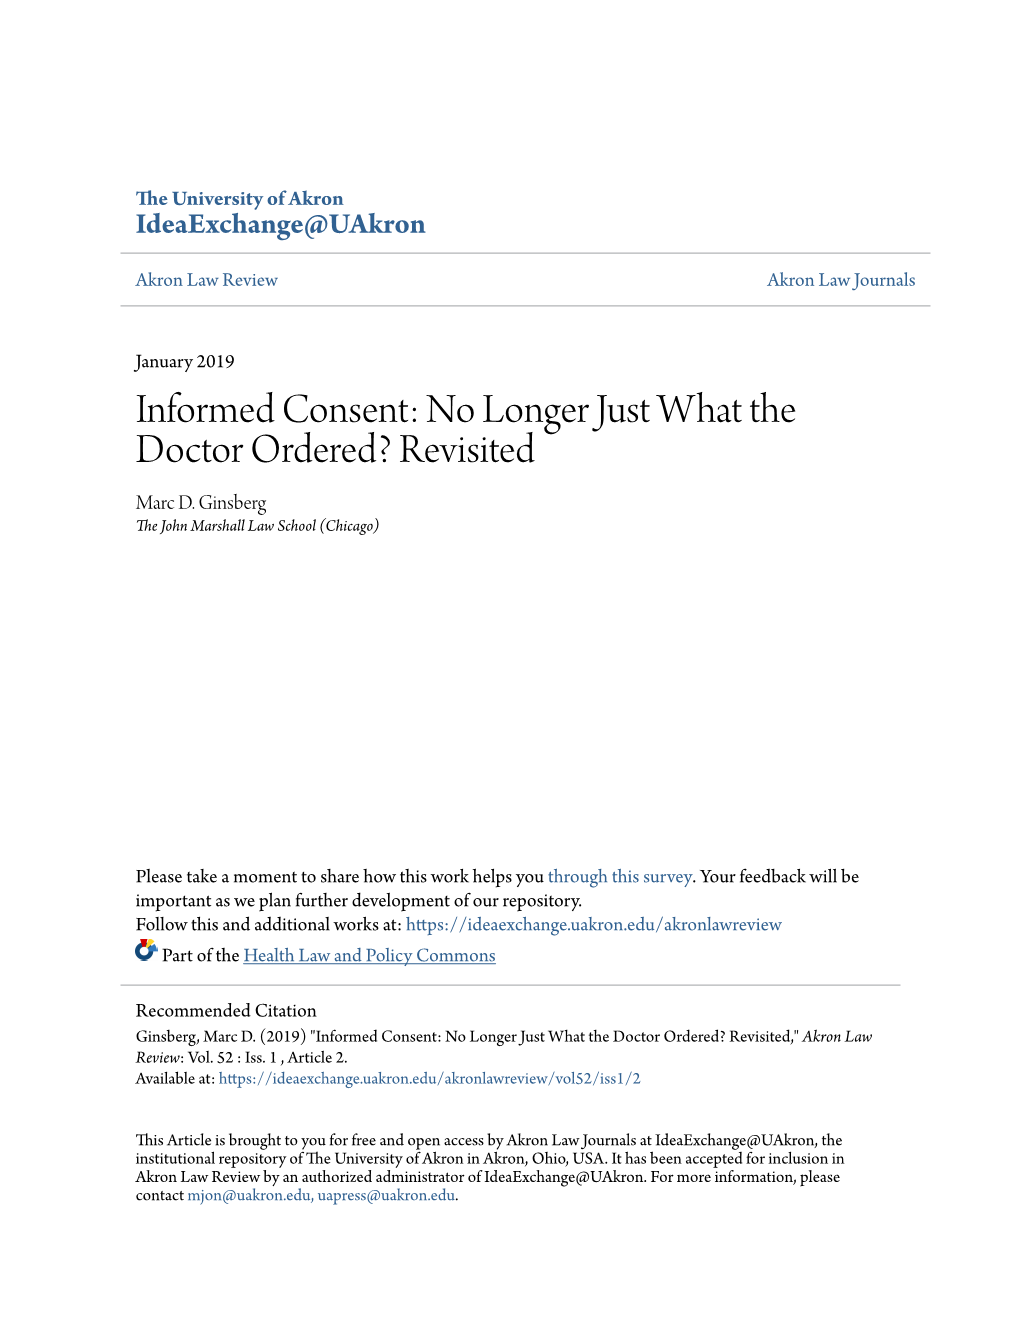 Informed Consent: No Longer Just What the Doctor Ordered? Revisited Marc D